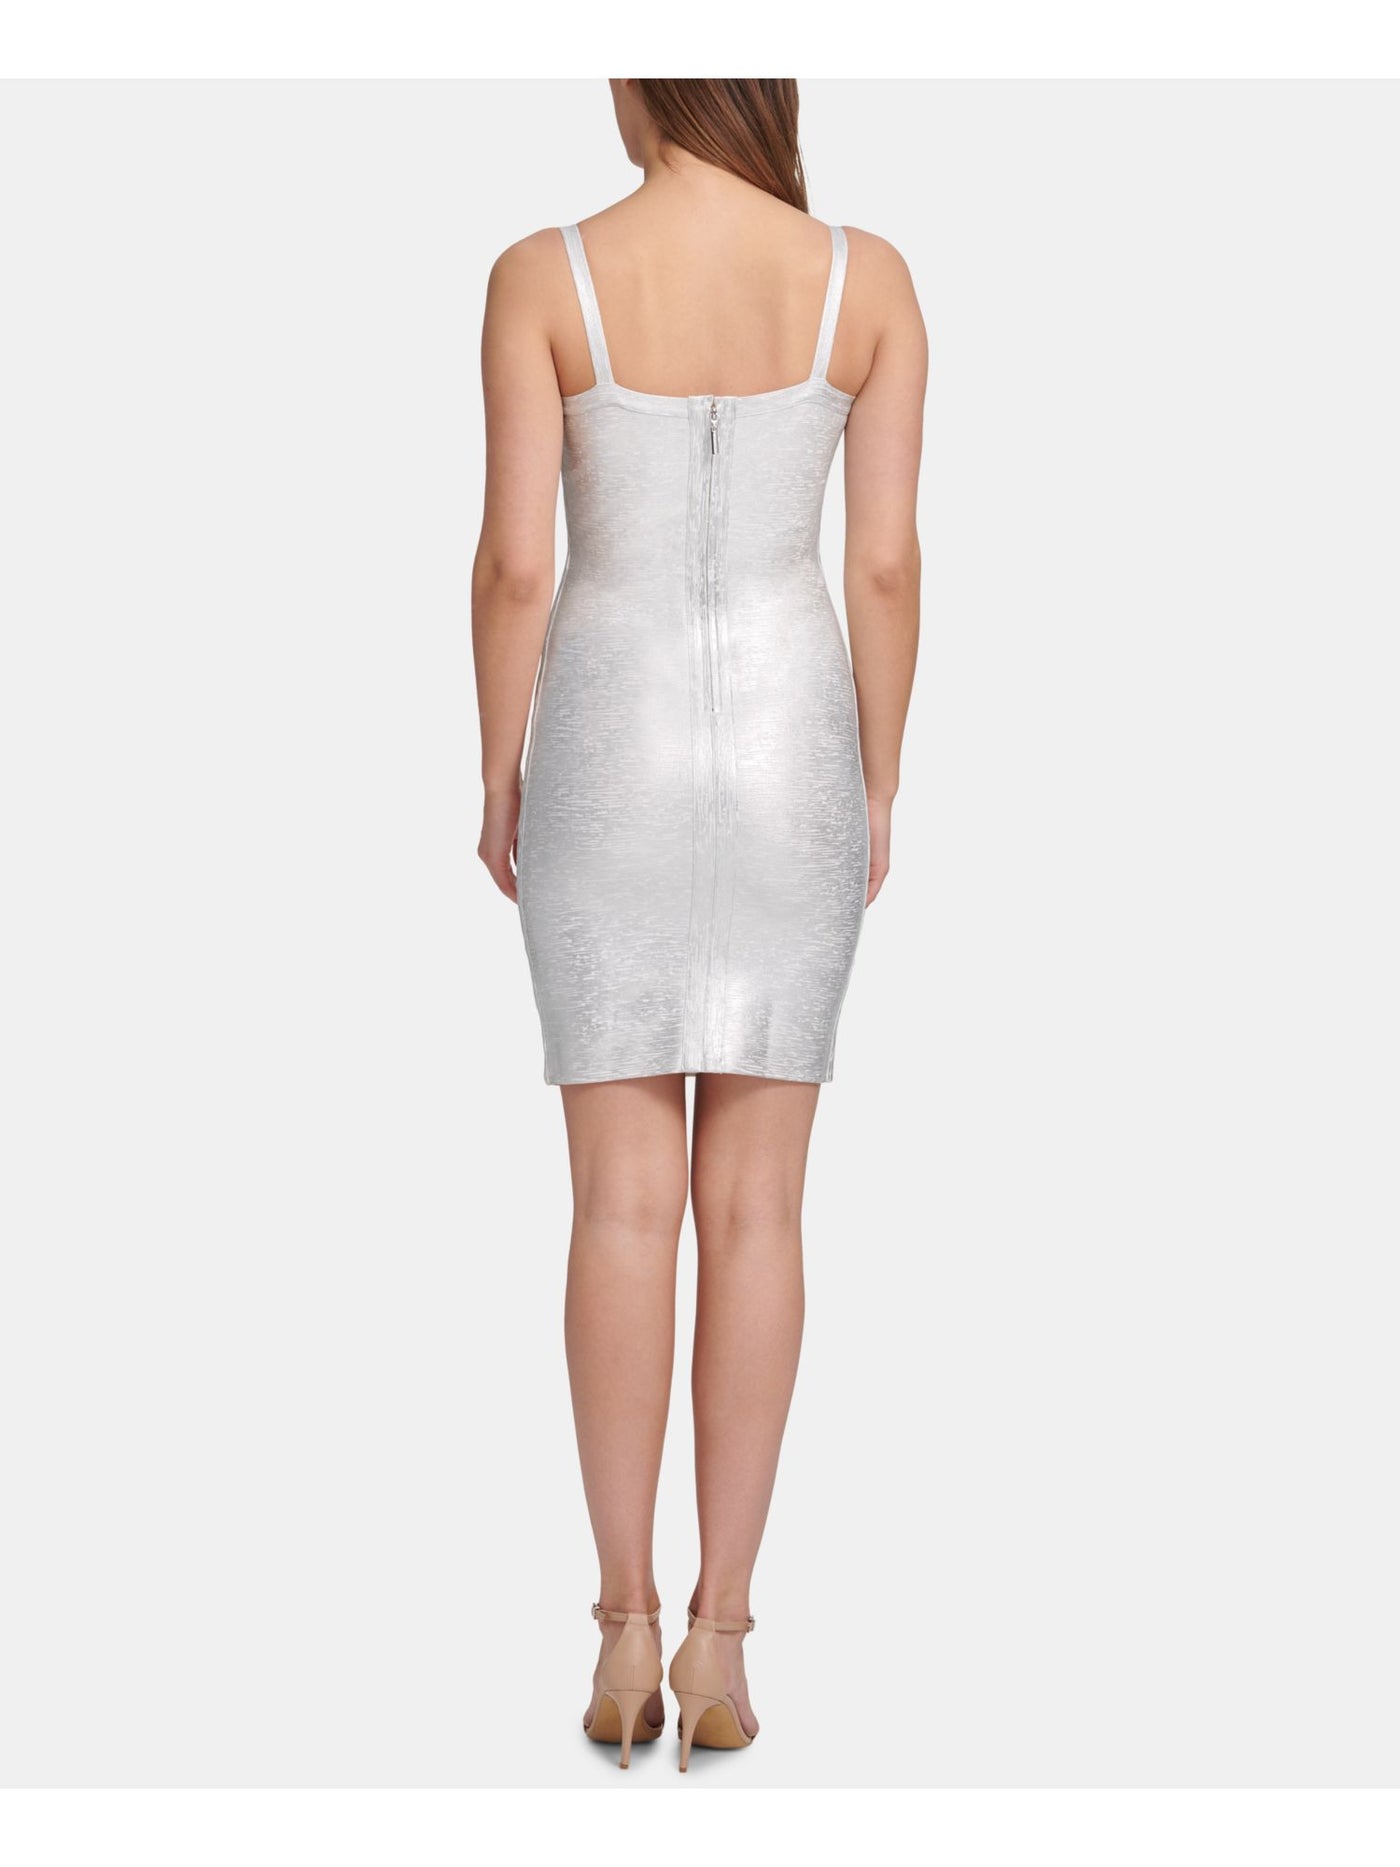 MARCIANO Womens Silver Zippered Spaghetti Strap Above The Knee Party Body Con Dress XS